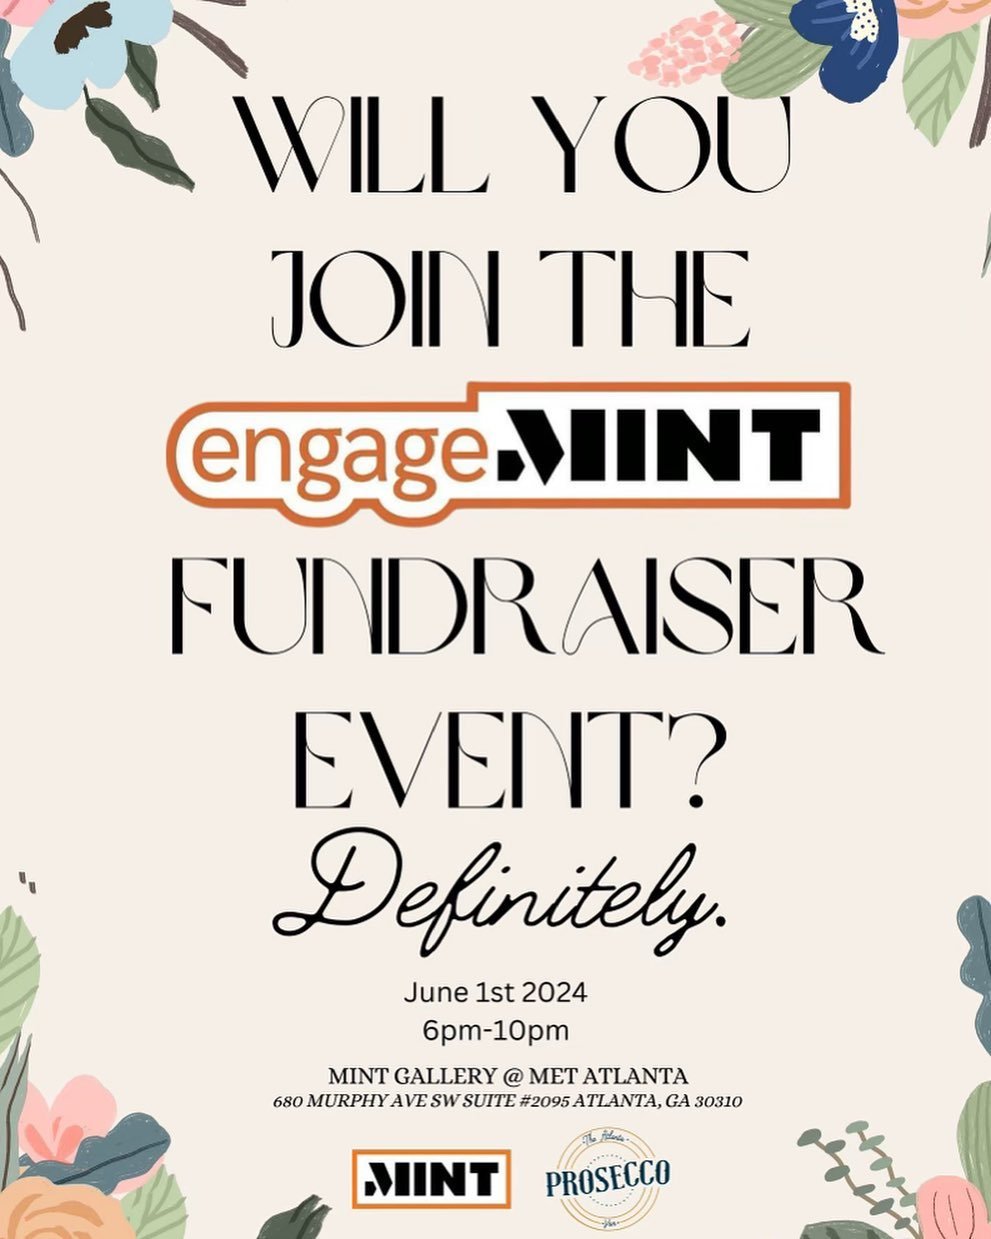 💐💐Get ready to create art memories and fundraise for a great cause at EngageMINT! 

Join us on June 1st from 6-10pm for an unforgettable exhibition party that helps MINT continue to support the art community. 

See you there, ticket link in linktre